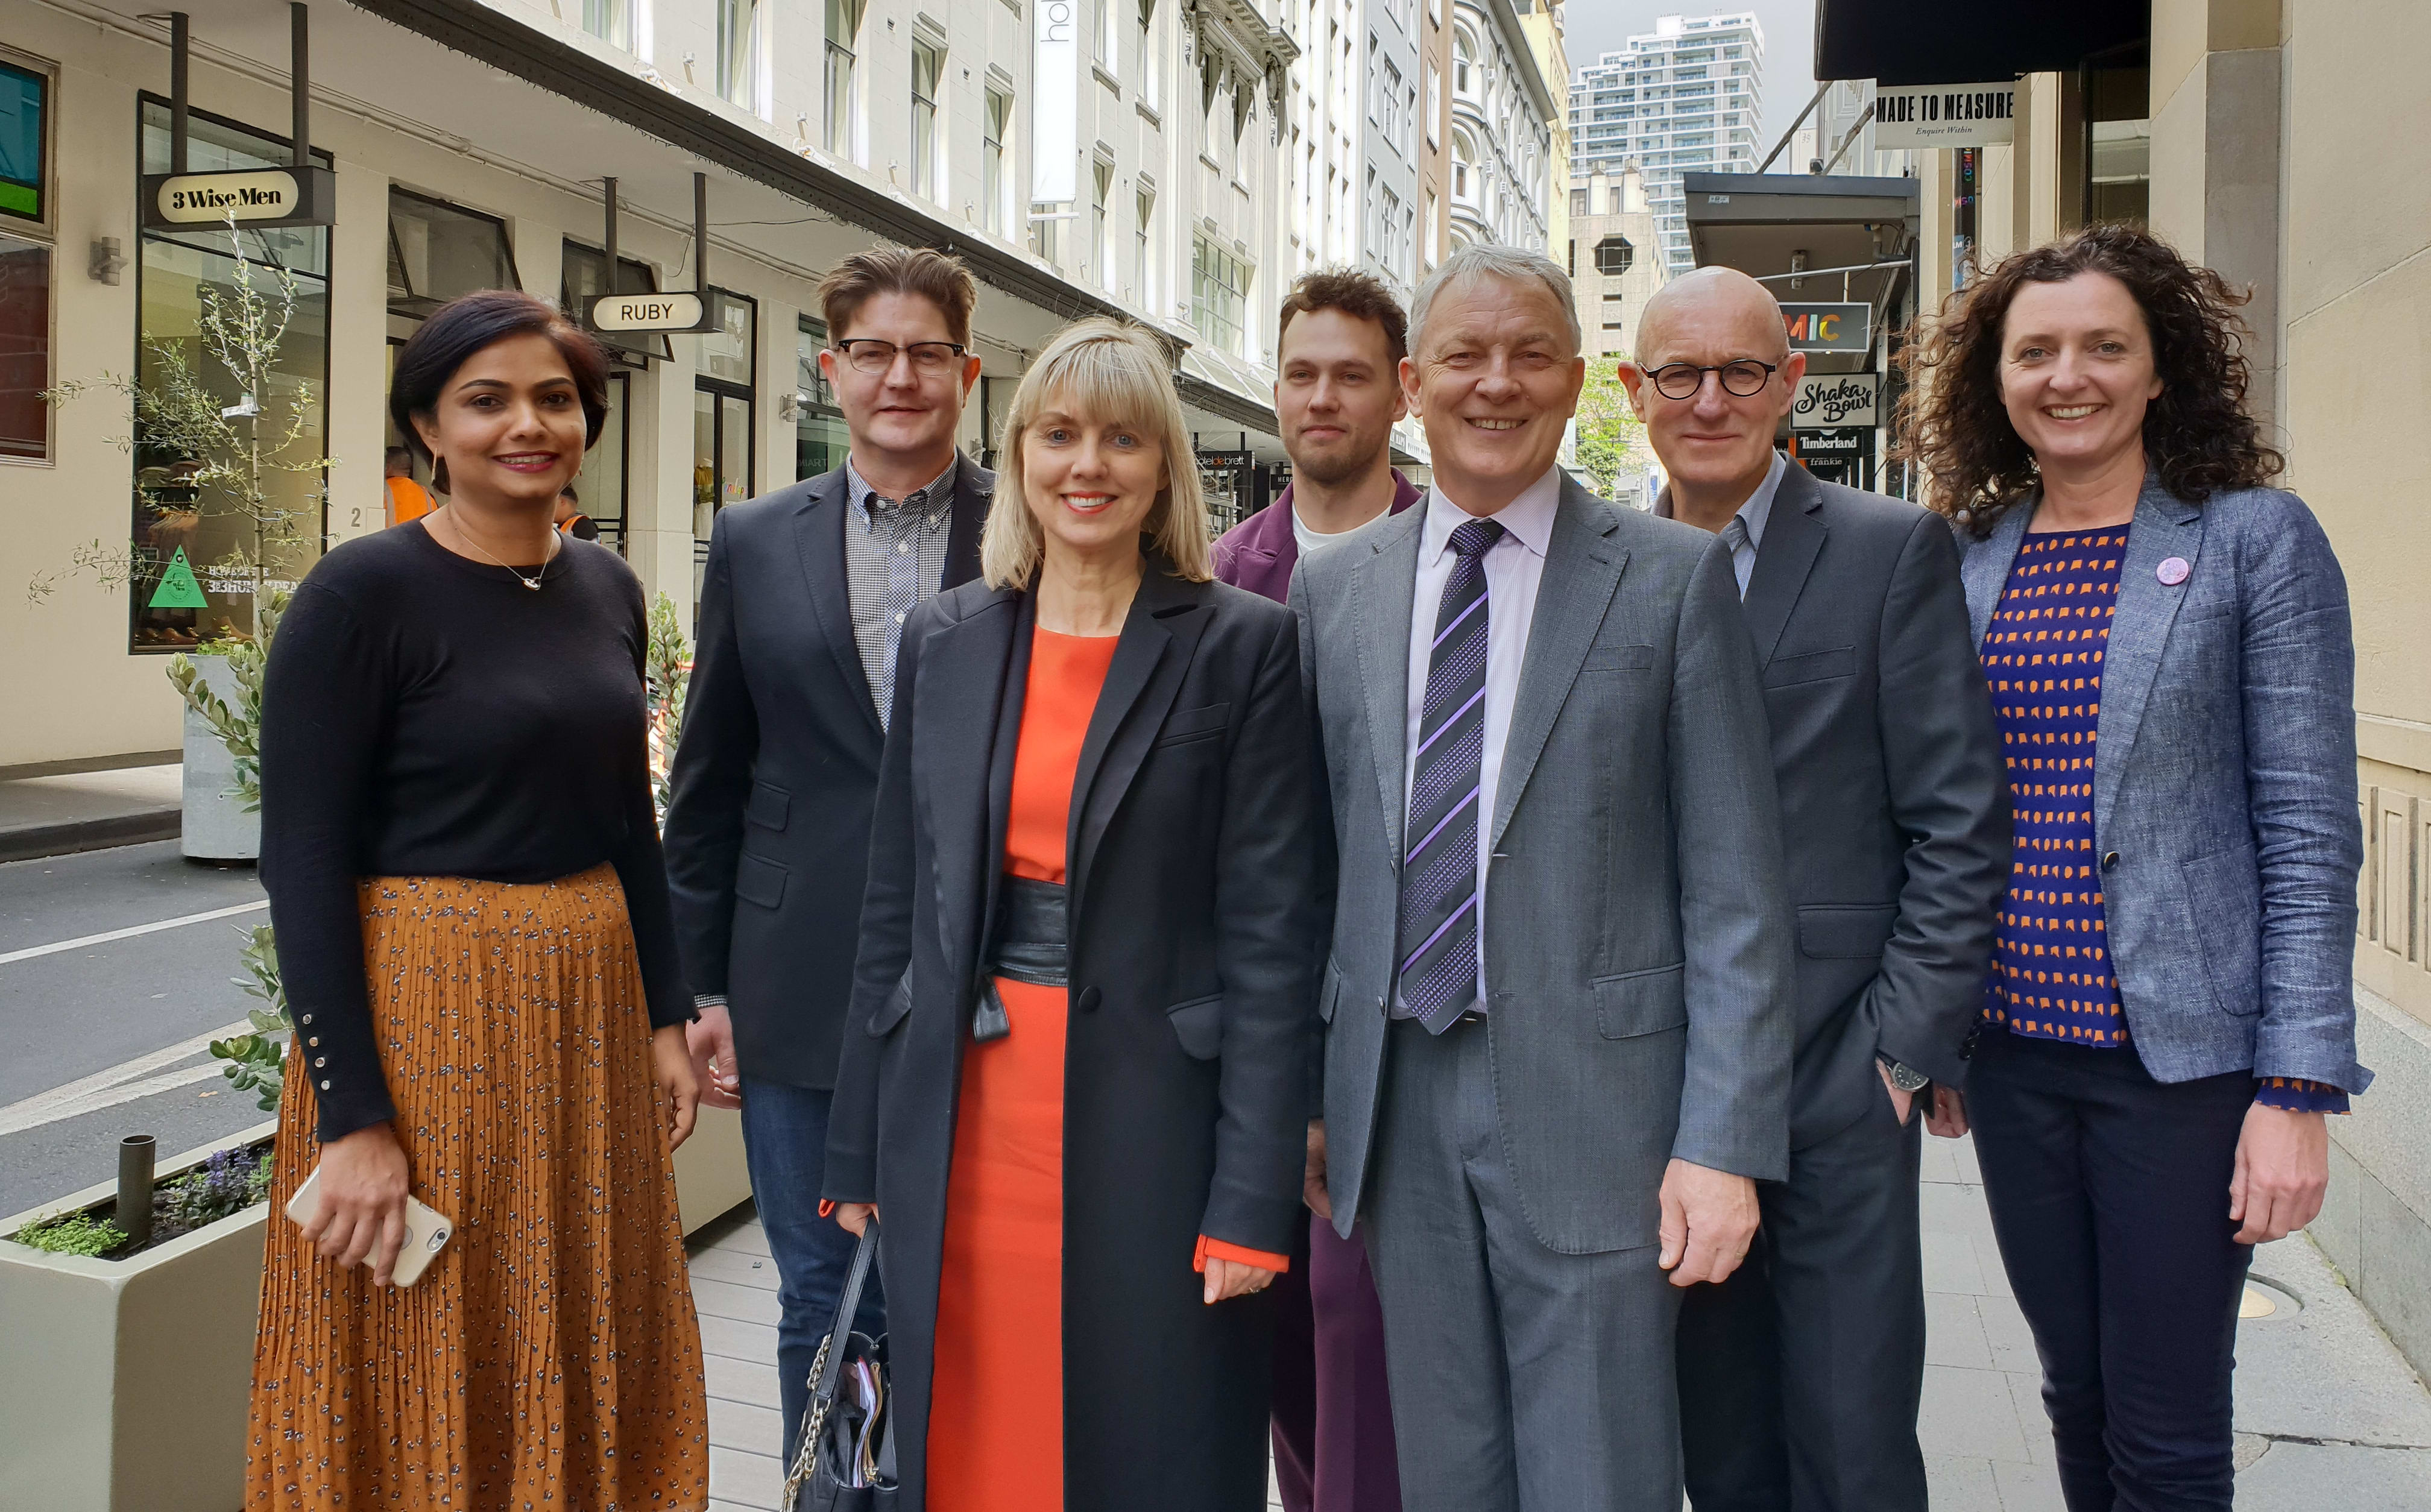 Mayor Phil Goff, Cr Chris Darby, Cam Perkins (design lead, Auckland Design Office), Viv Beck, Heart of the City chief executive and  High Street business owners.